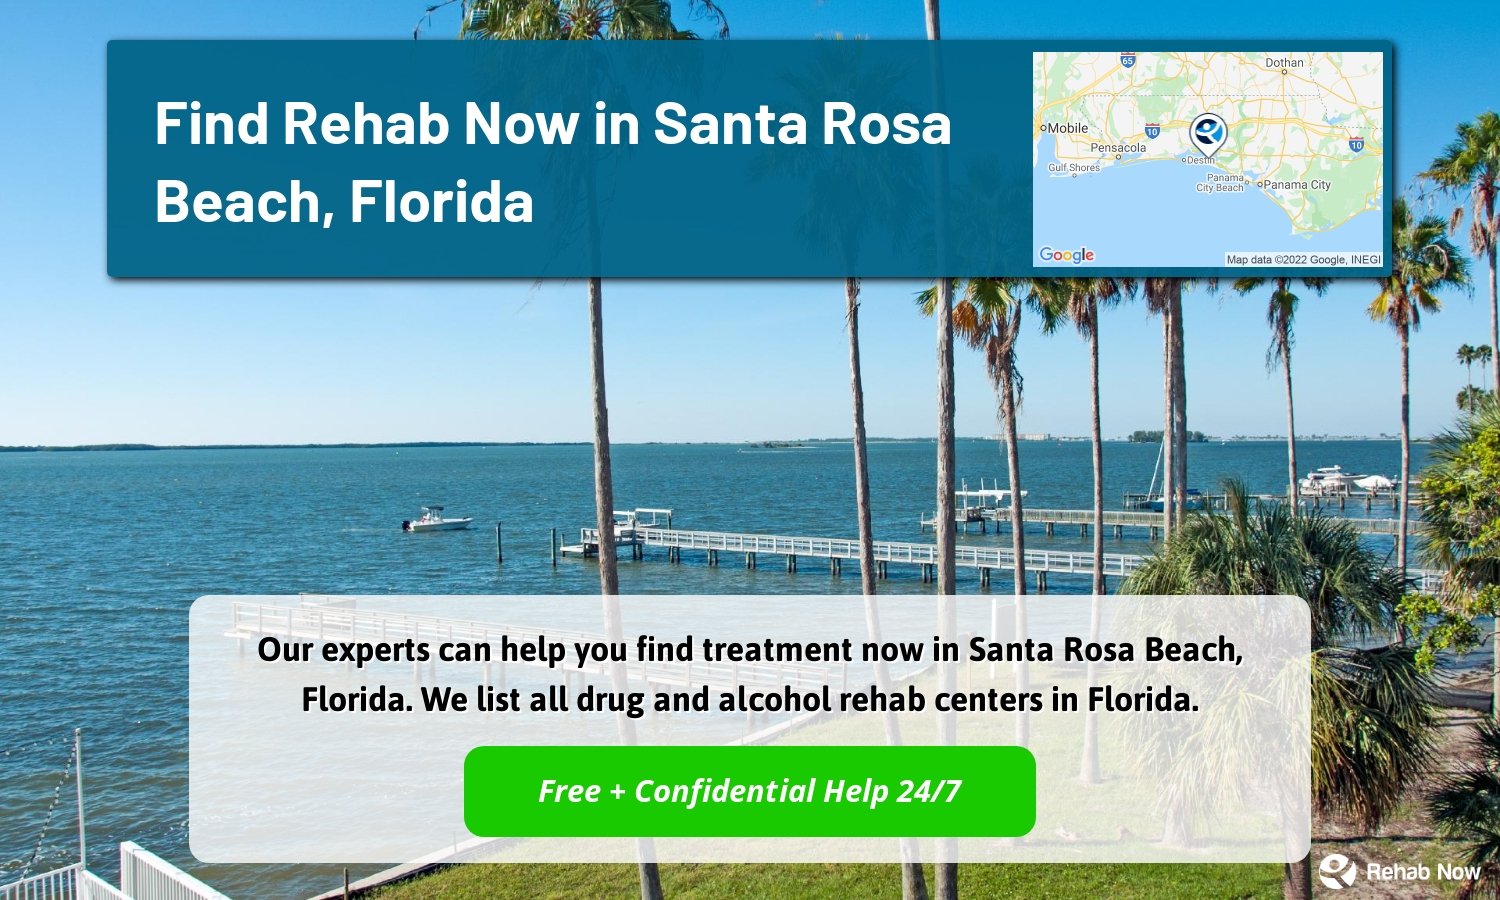 Our experts can help you find treatment now in Santa Rosa Beach, Florida. We list all drug and alcohol rehab centers in Florida.